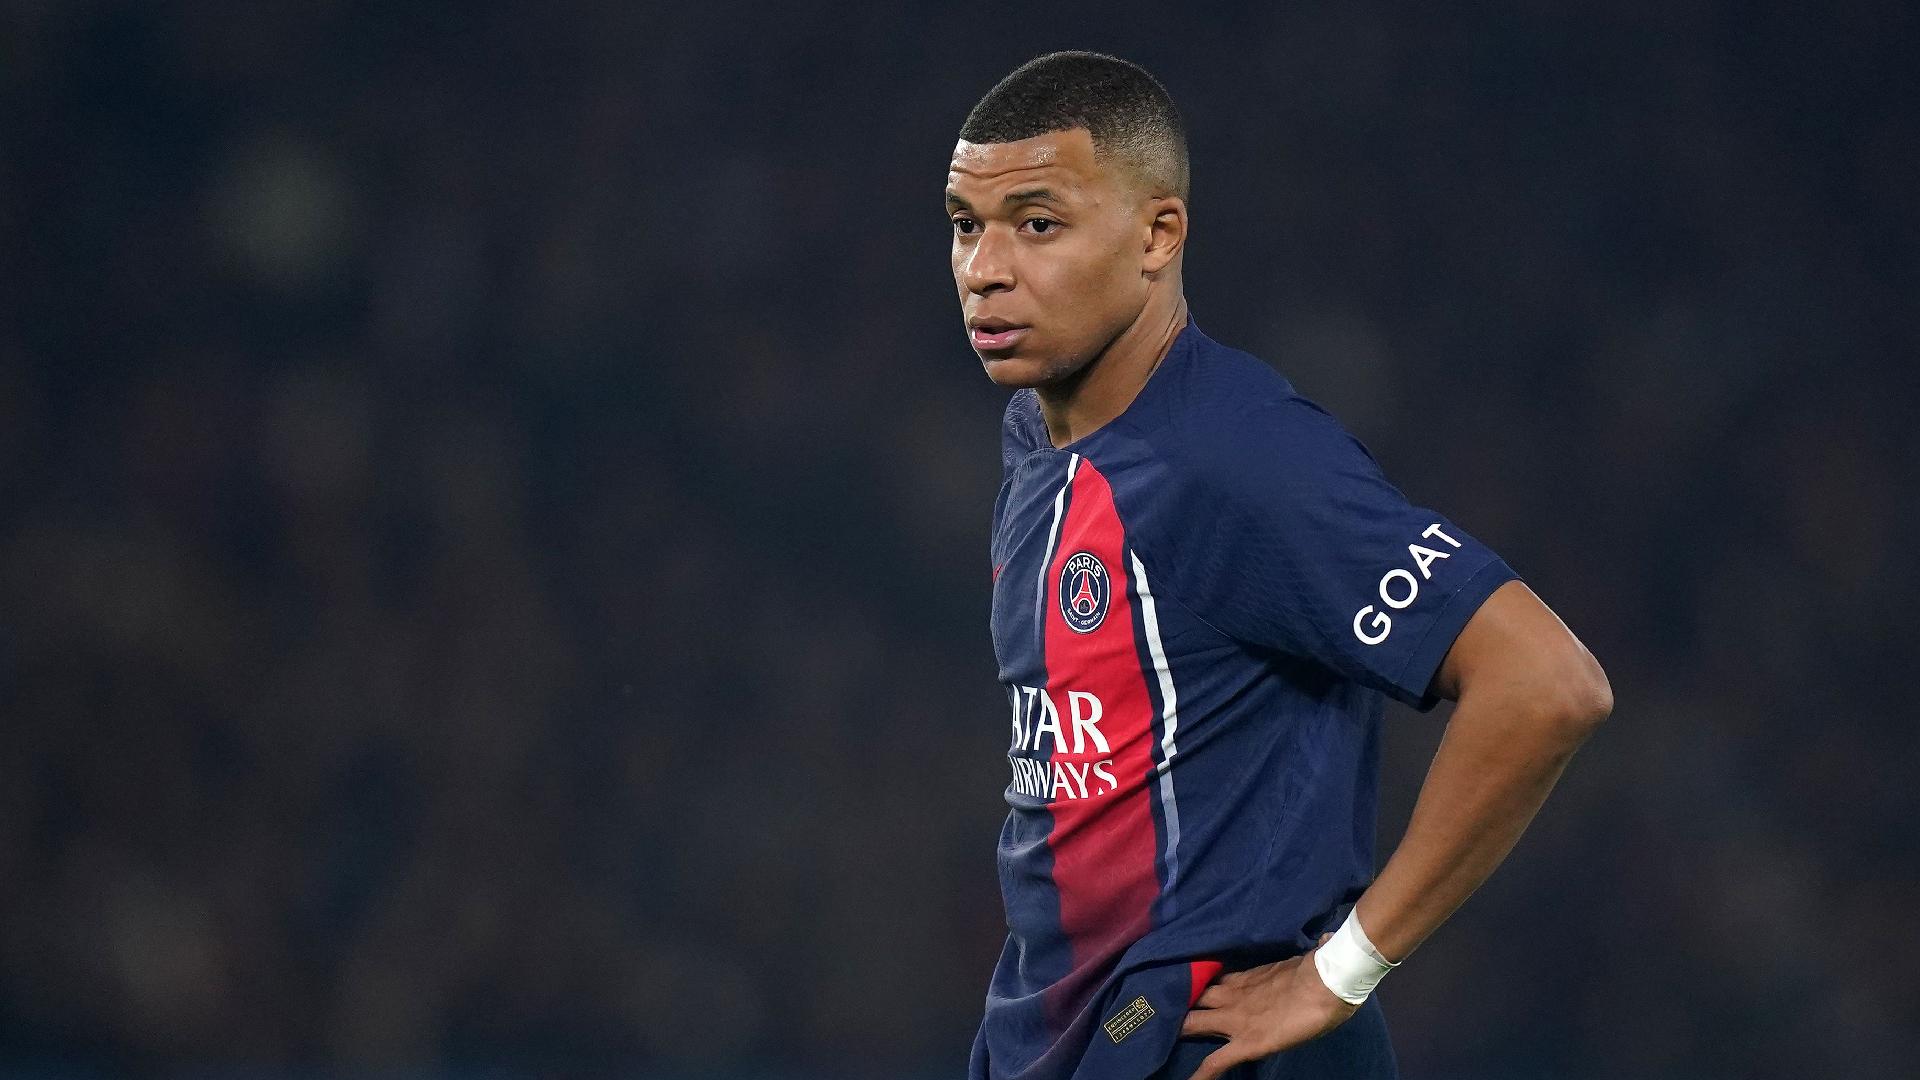 Real Madrid using bargaining chip to negotiate Kylian Mbappe down on image rights